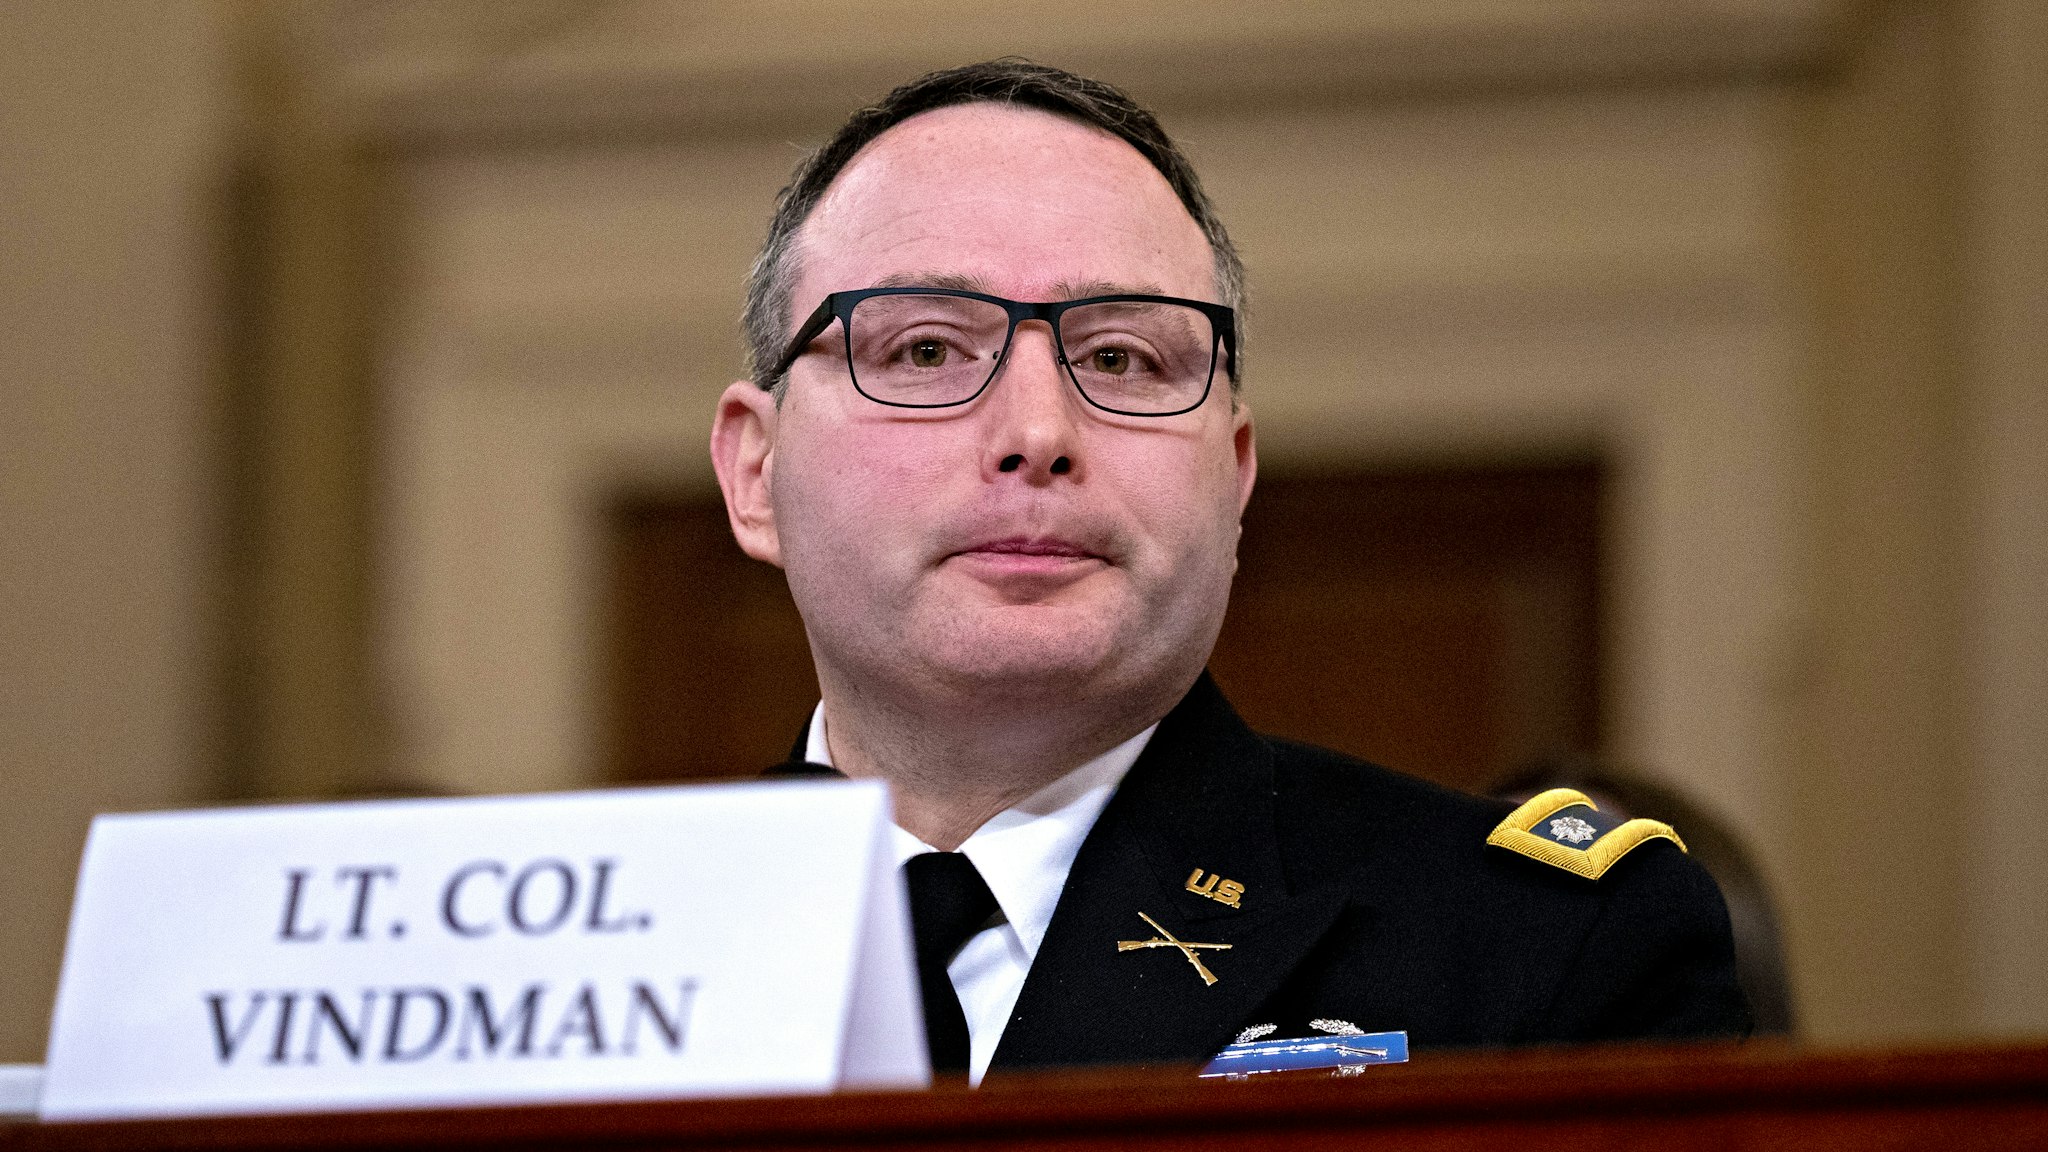 Alexander Vindman, director for European affairs on the National Security Council, listens during a House Intelligence Committee impeachment inquiry hearing in Washington, D.C., U.S., on Tuesday, Nov. 19, 2019. The committee plans to hear from eight witnesses in open hearings this week in the impeachment inquiry into President Donald Trump.